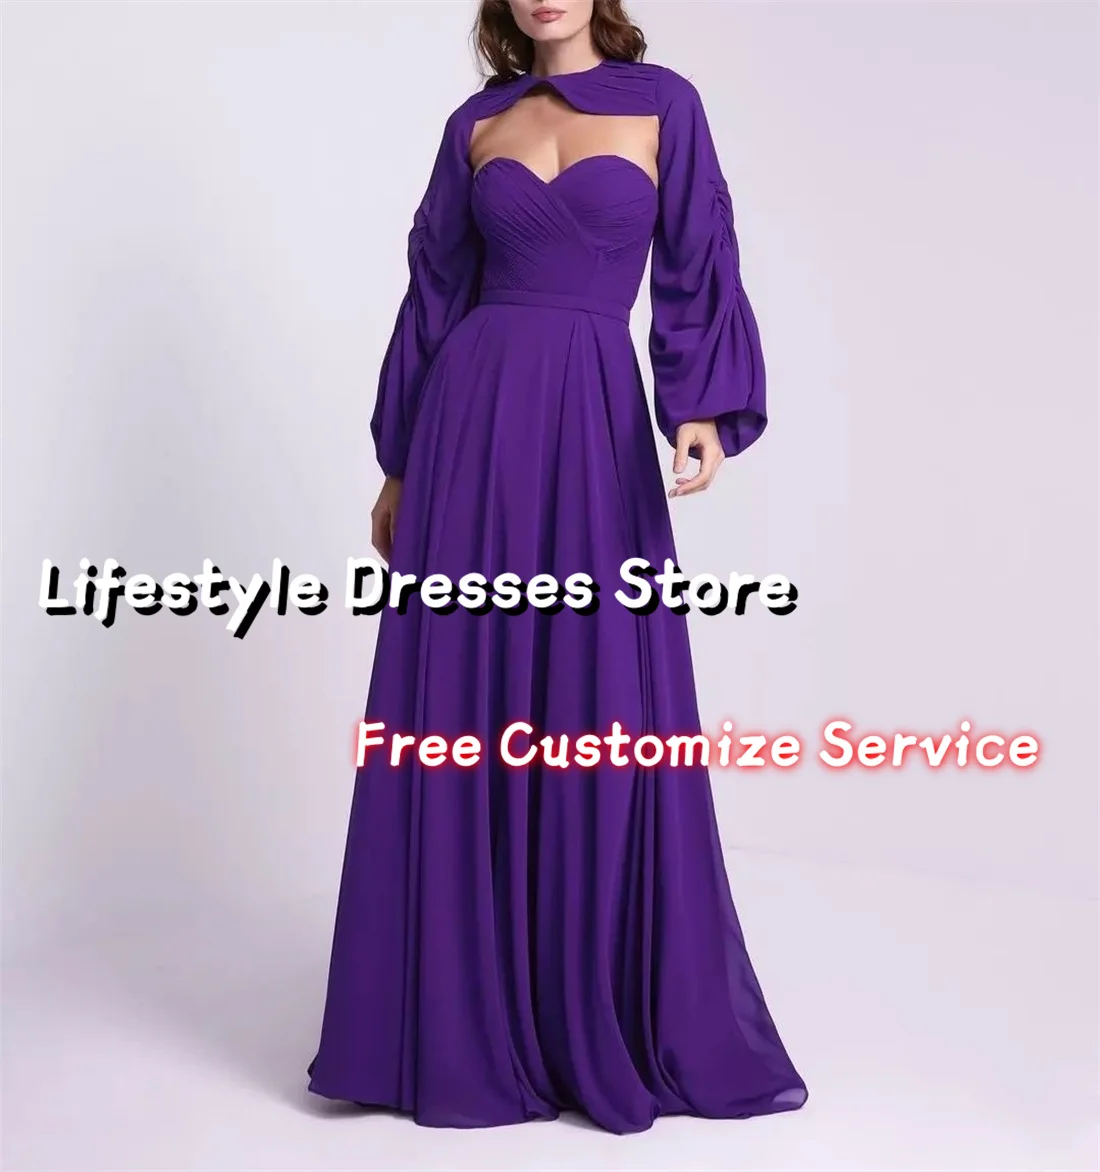 

Sweetheart Pleat A-Line Purple Prom Dresses Puff Sleeve Floor-Length Evening Dresses Party Gown vestidos para eventos especiales